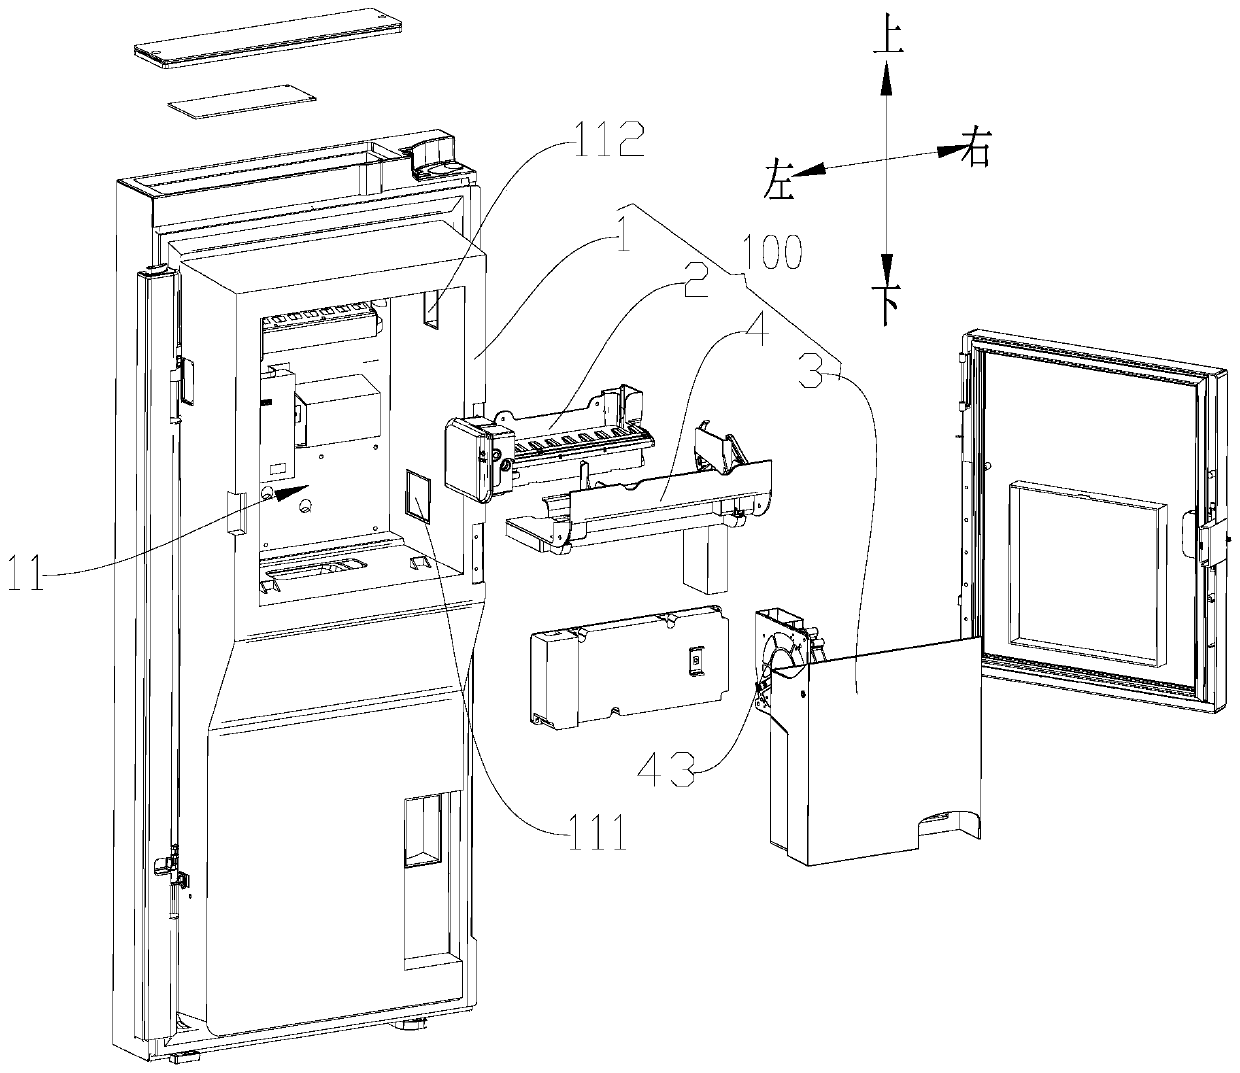 Ice maker and refrigerator with same